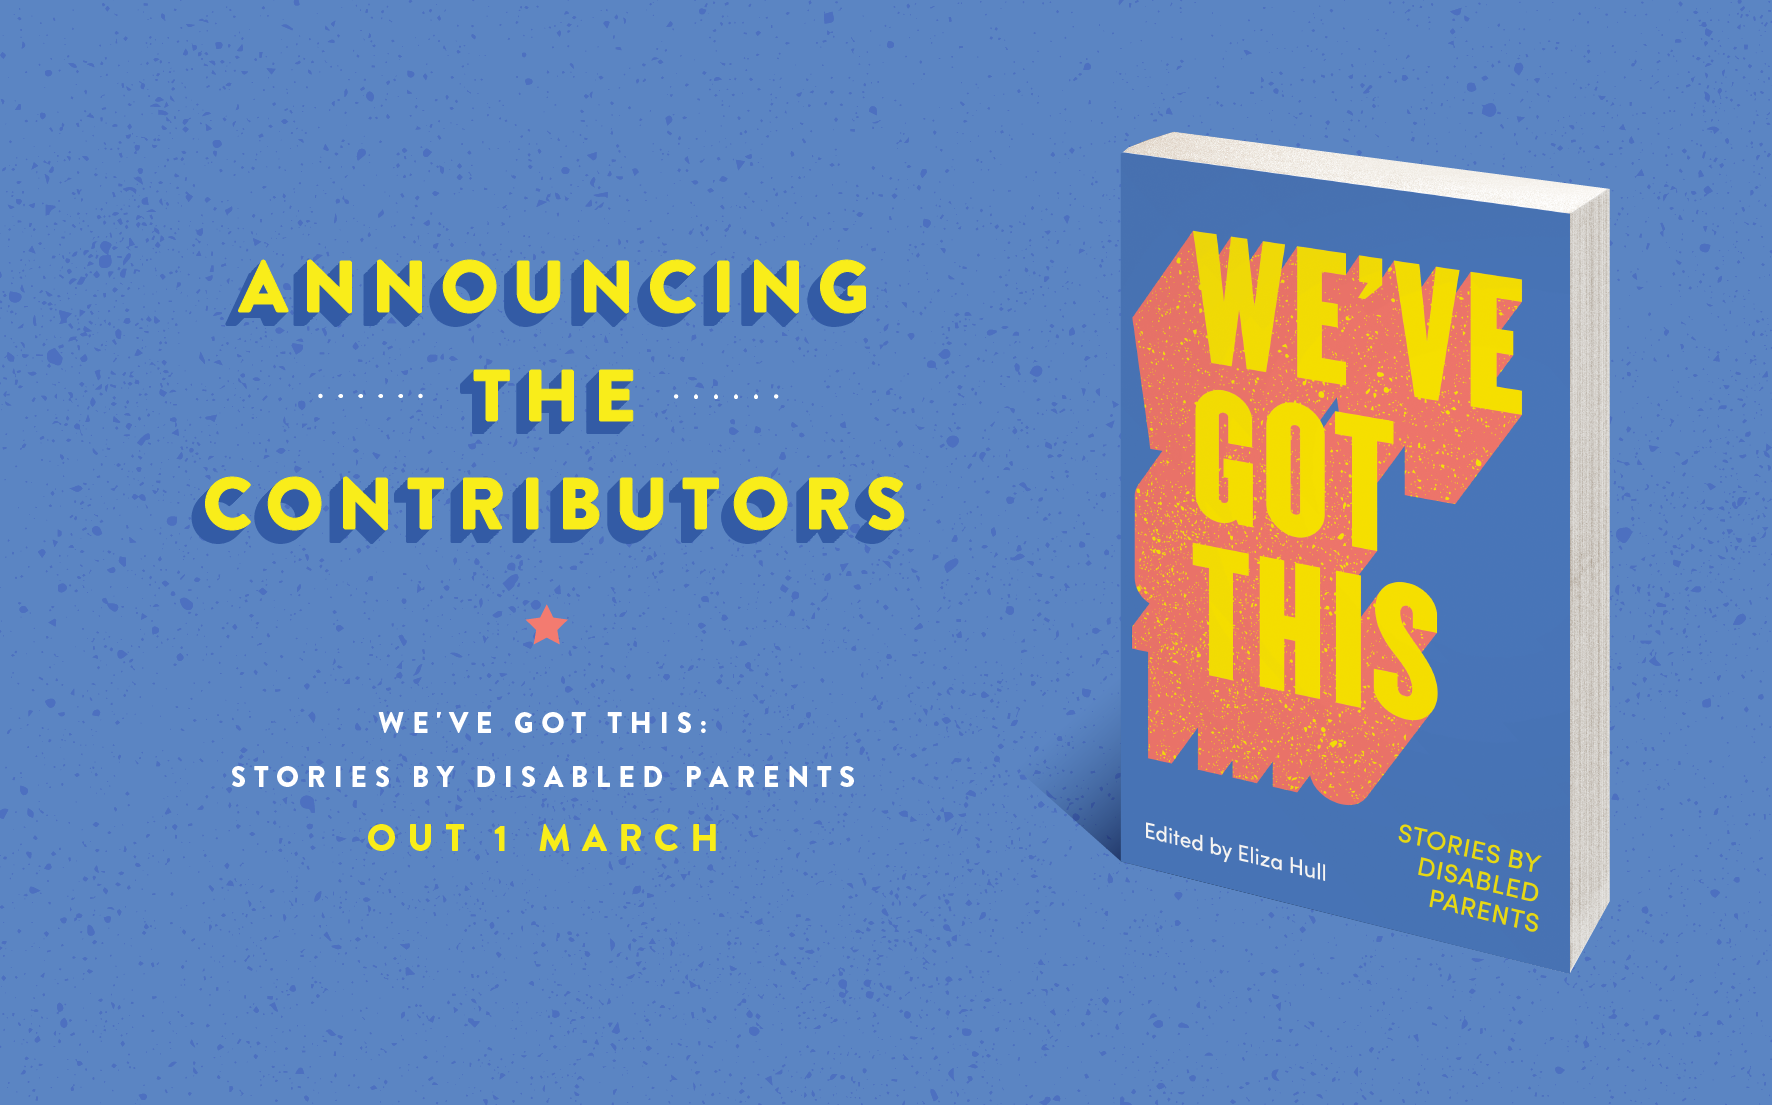 A light blue image reads, ‘Announcing the Contributors’ in yellow text. Yellow dotted lines adorned either side of ‘the’. A coral coloured star sits below ‘Contributors’.  White text reads, ‘We’ve Got This: Stories by Disabled Parents’ and yellow text notes the release date of the book, ‘OUT 1 MARCH’. The cover of the book sits to the right of the image. The title of the book ‘We've Got This’ extends across the book cover in bright yellow with bold coral outlines. 